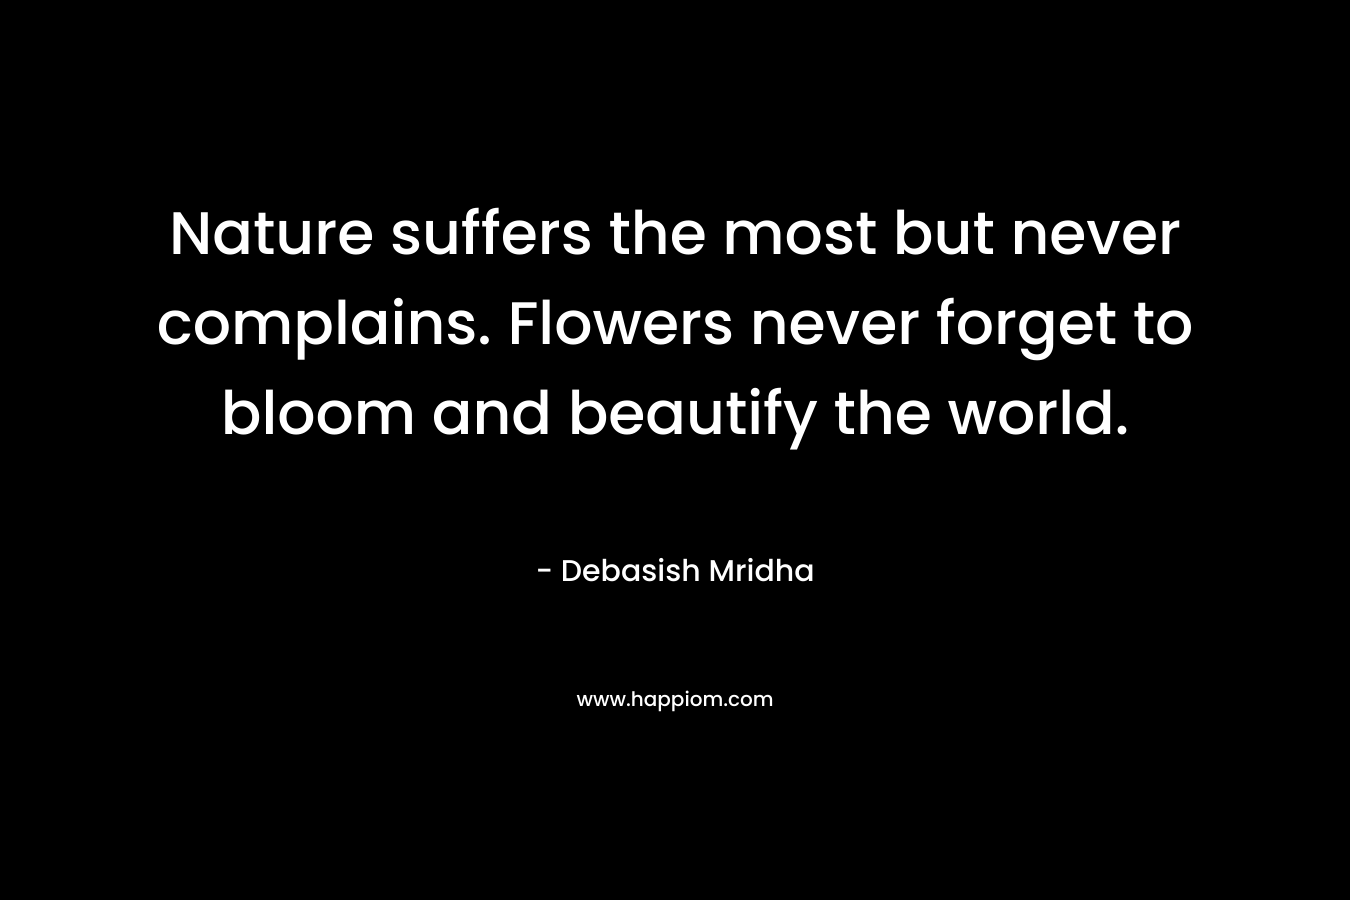 Nature suffers the most but never complains. Flowers never forget to bloom and beautify the world.